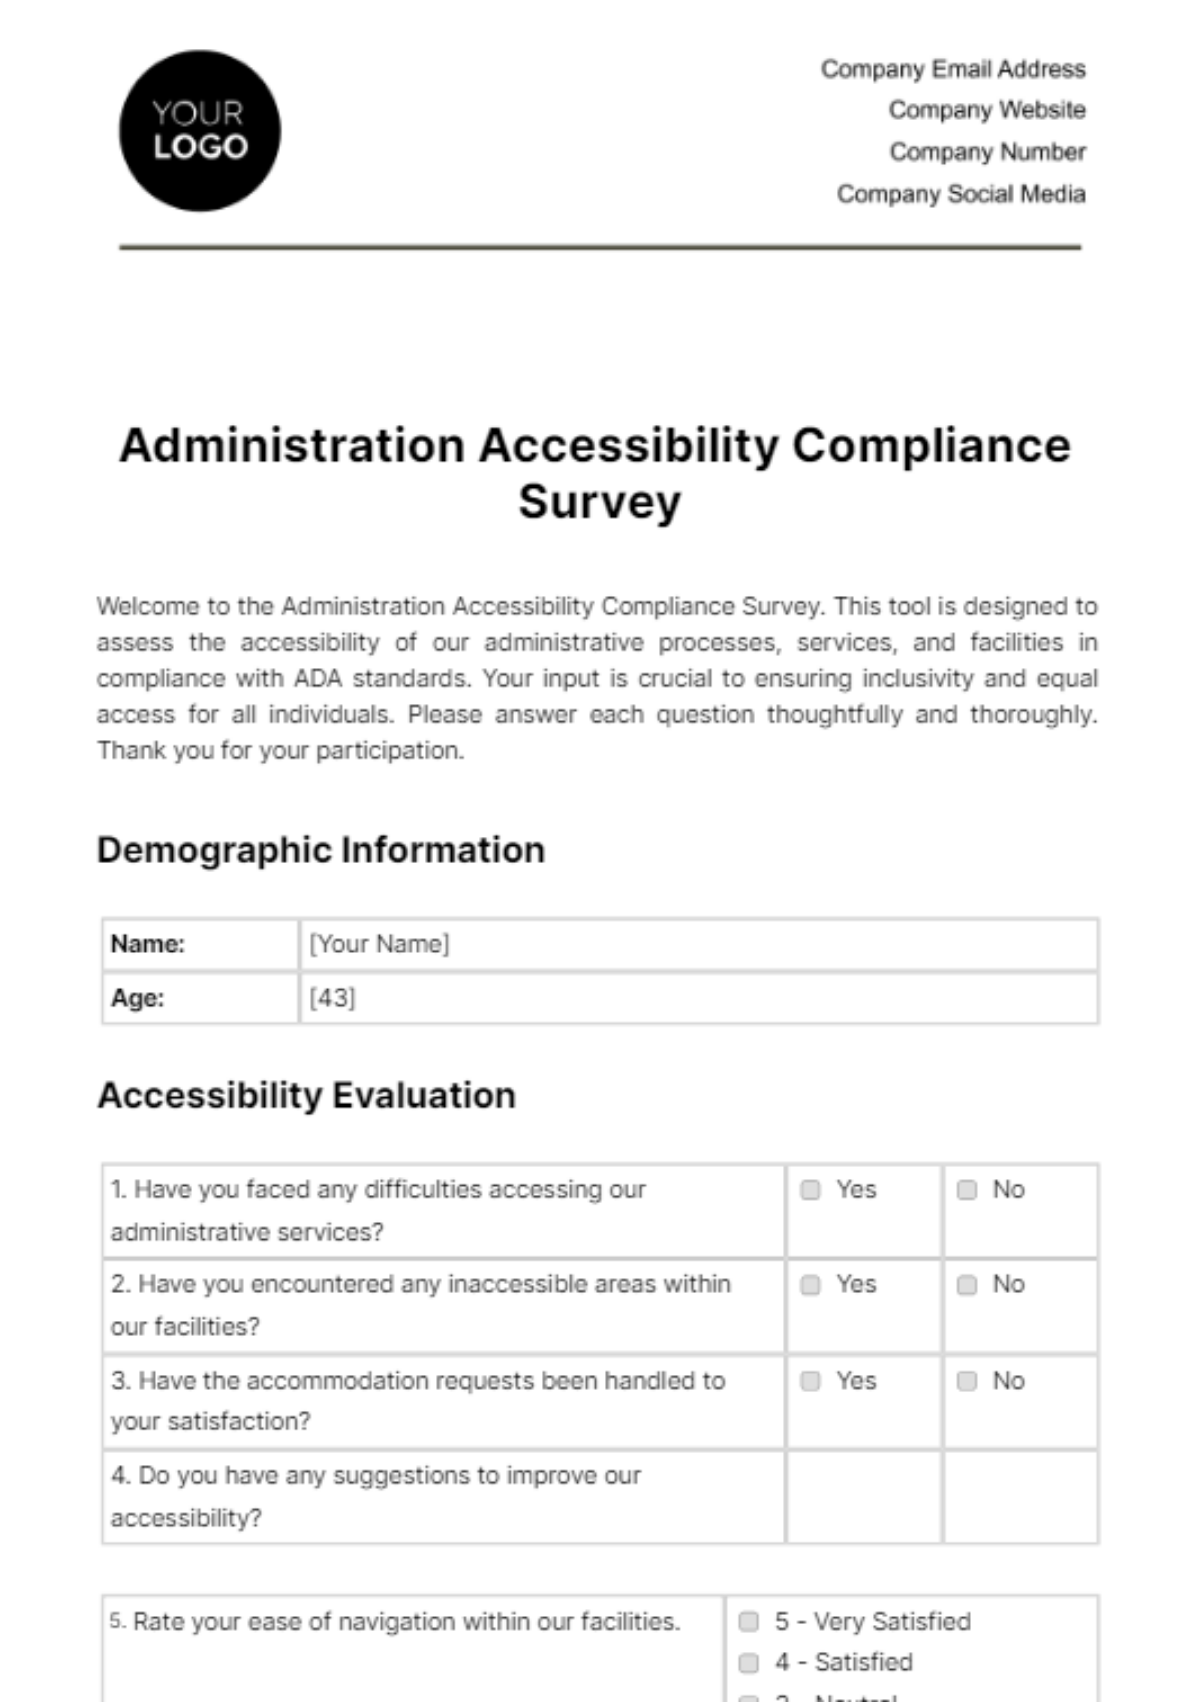 Administration Accessibility Compliance Survey Template